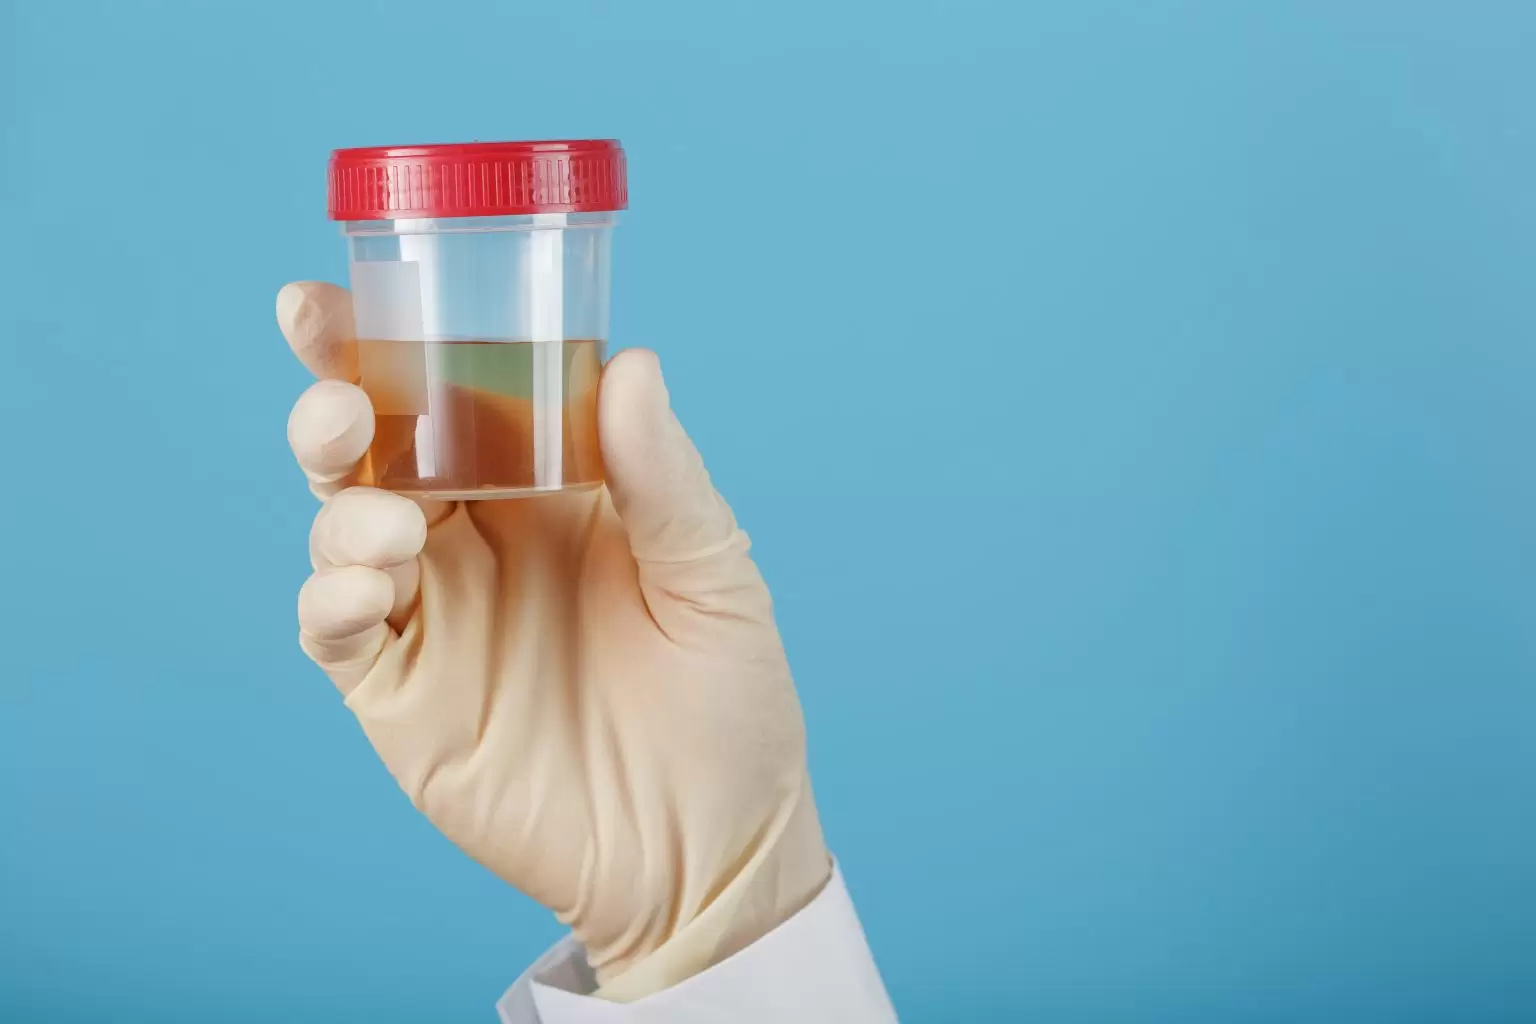 doctor-is-holding-plastic-can-urine-analysis-1536x1024-1.webp